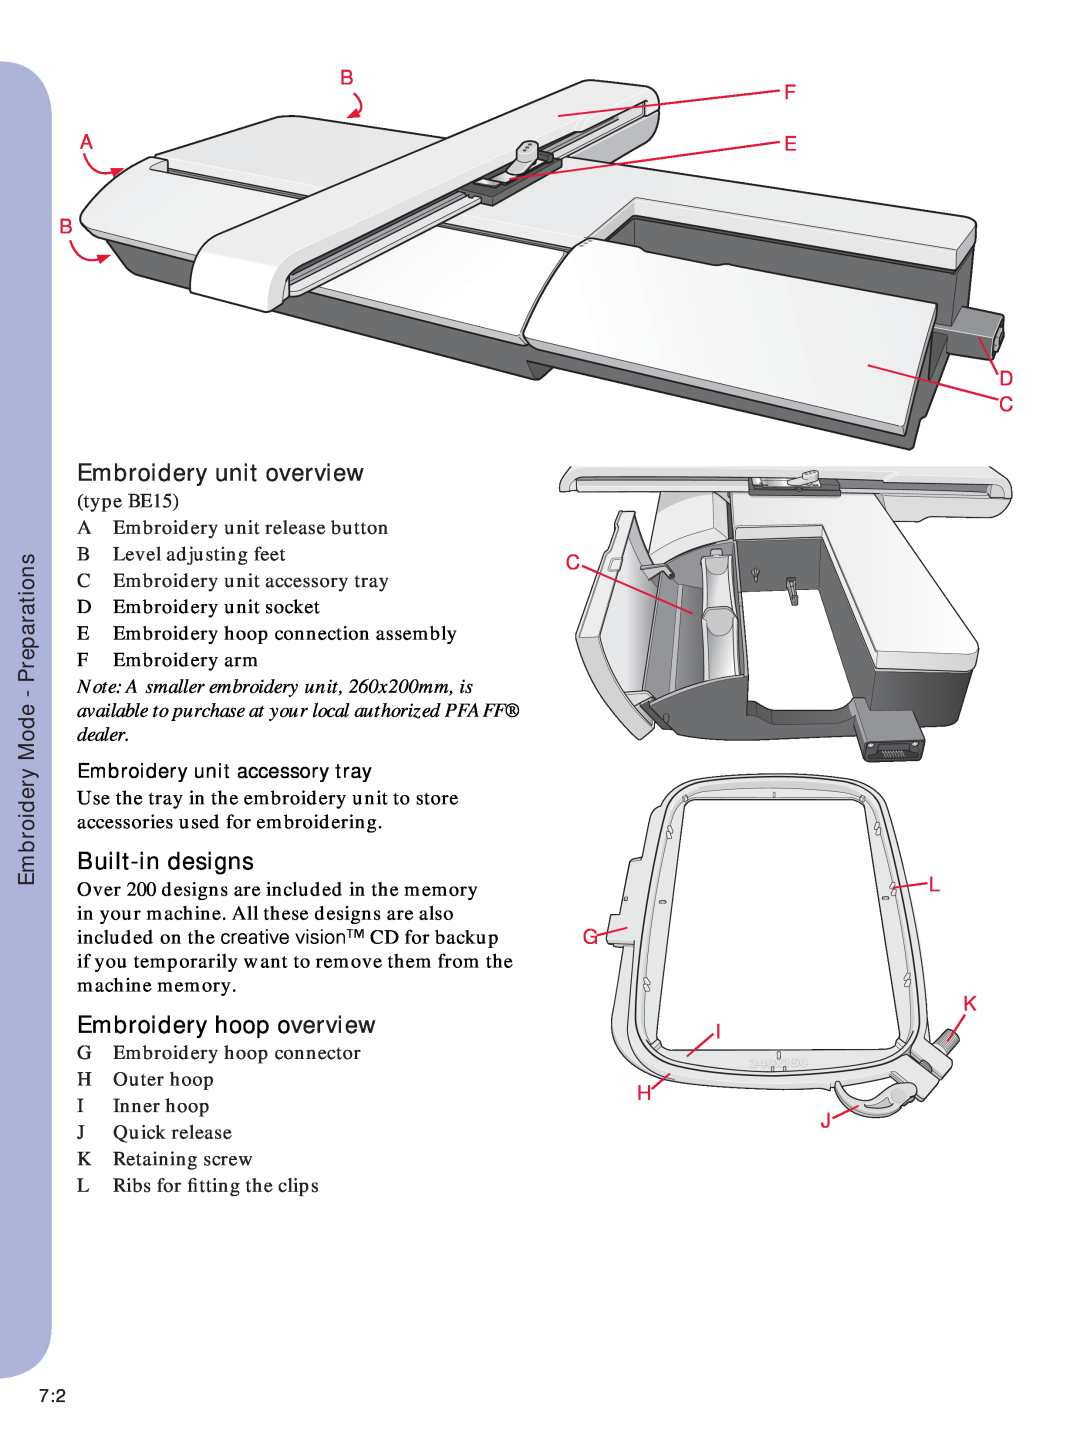 Pfaff Embroidery Machine manual Embroidery unit overview, Embroidery Mode - Preparations, B A B, F E D C, C L G K I H J 